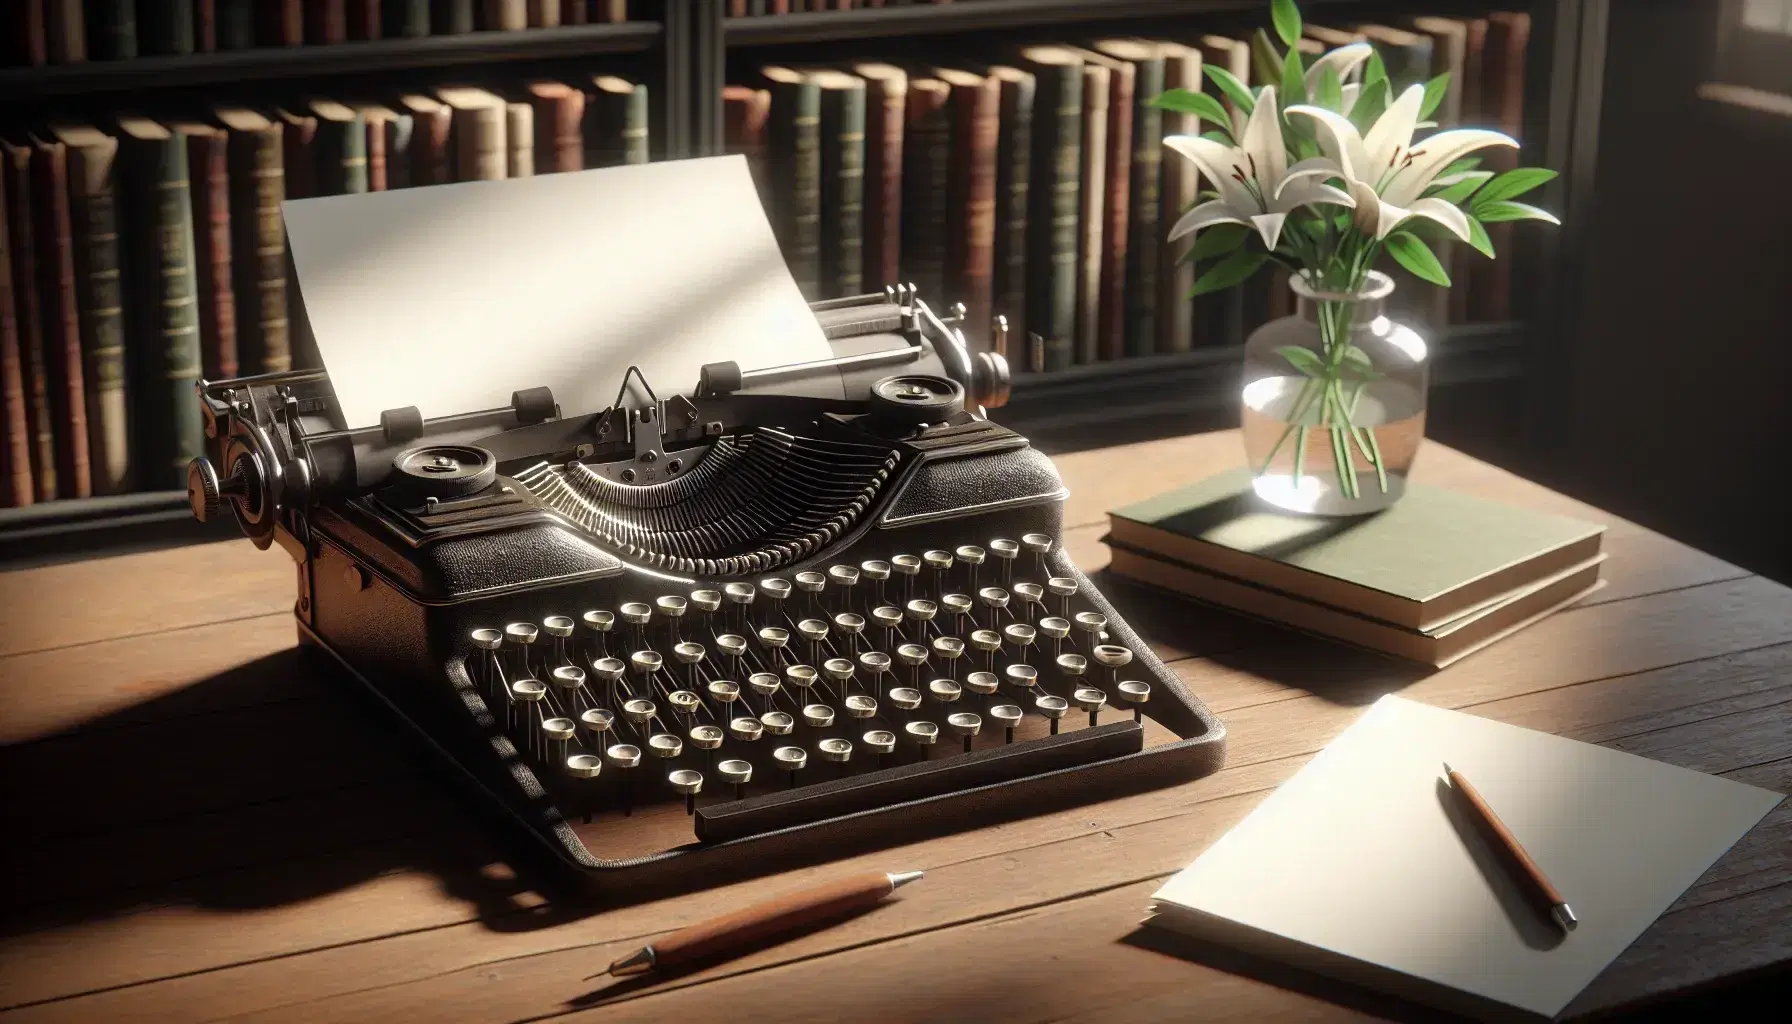 Vintage black-keyed typewriter on a wooden desk with a stack of white paper and a vase of white lilies, against a blurred bookshelf background.